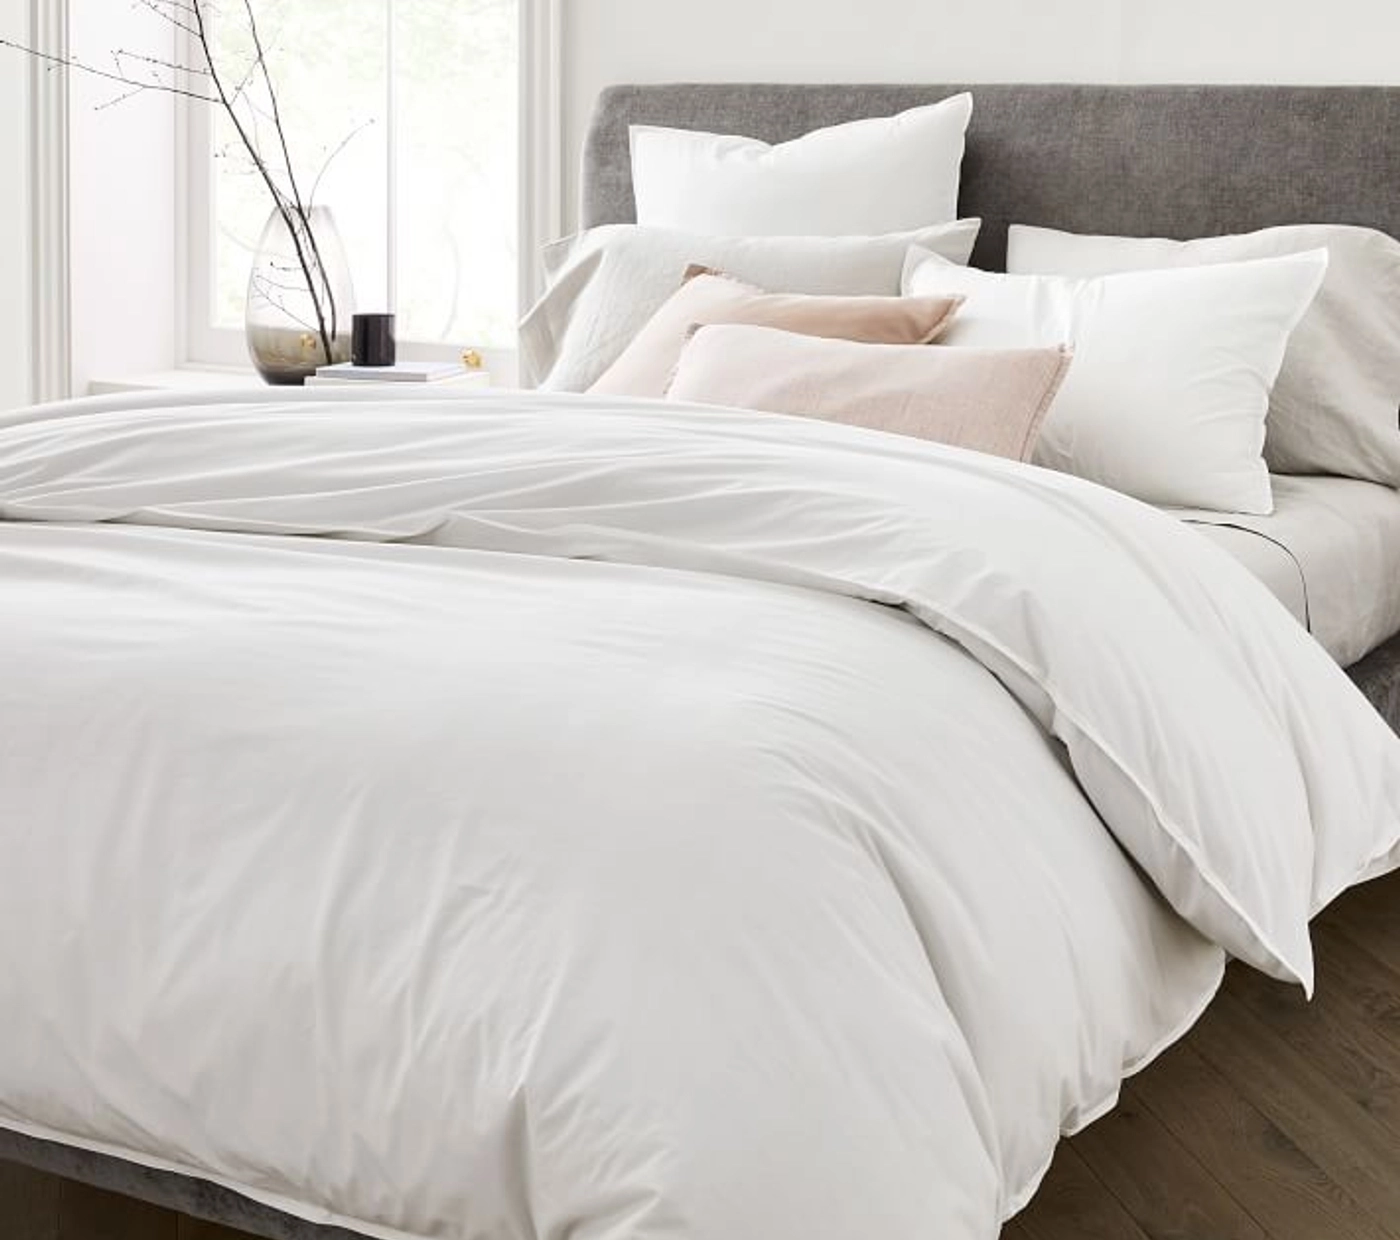 How to Properly Care for Your Oxford Pillowcase and Organic Duvet Cover?